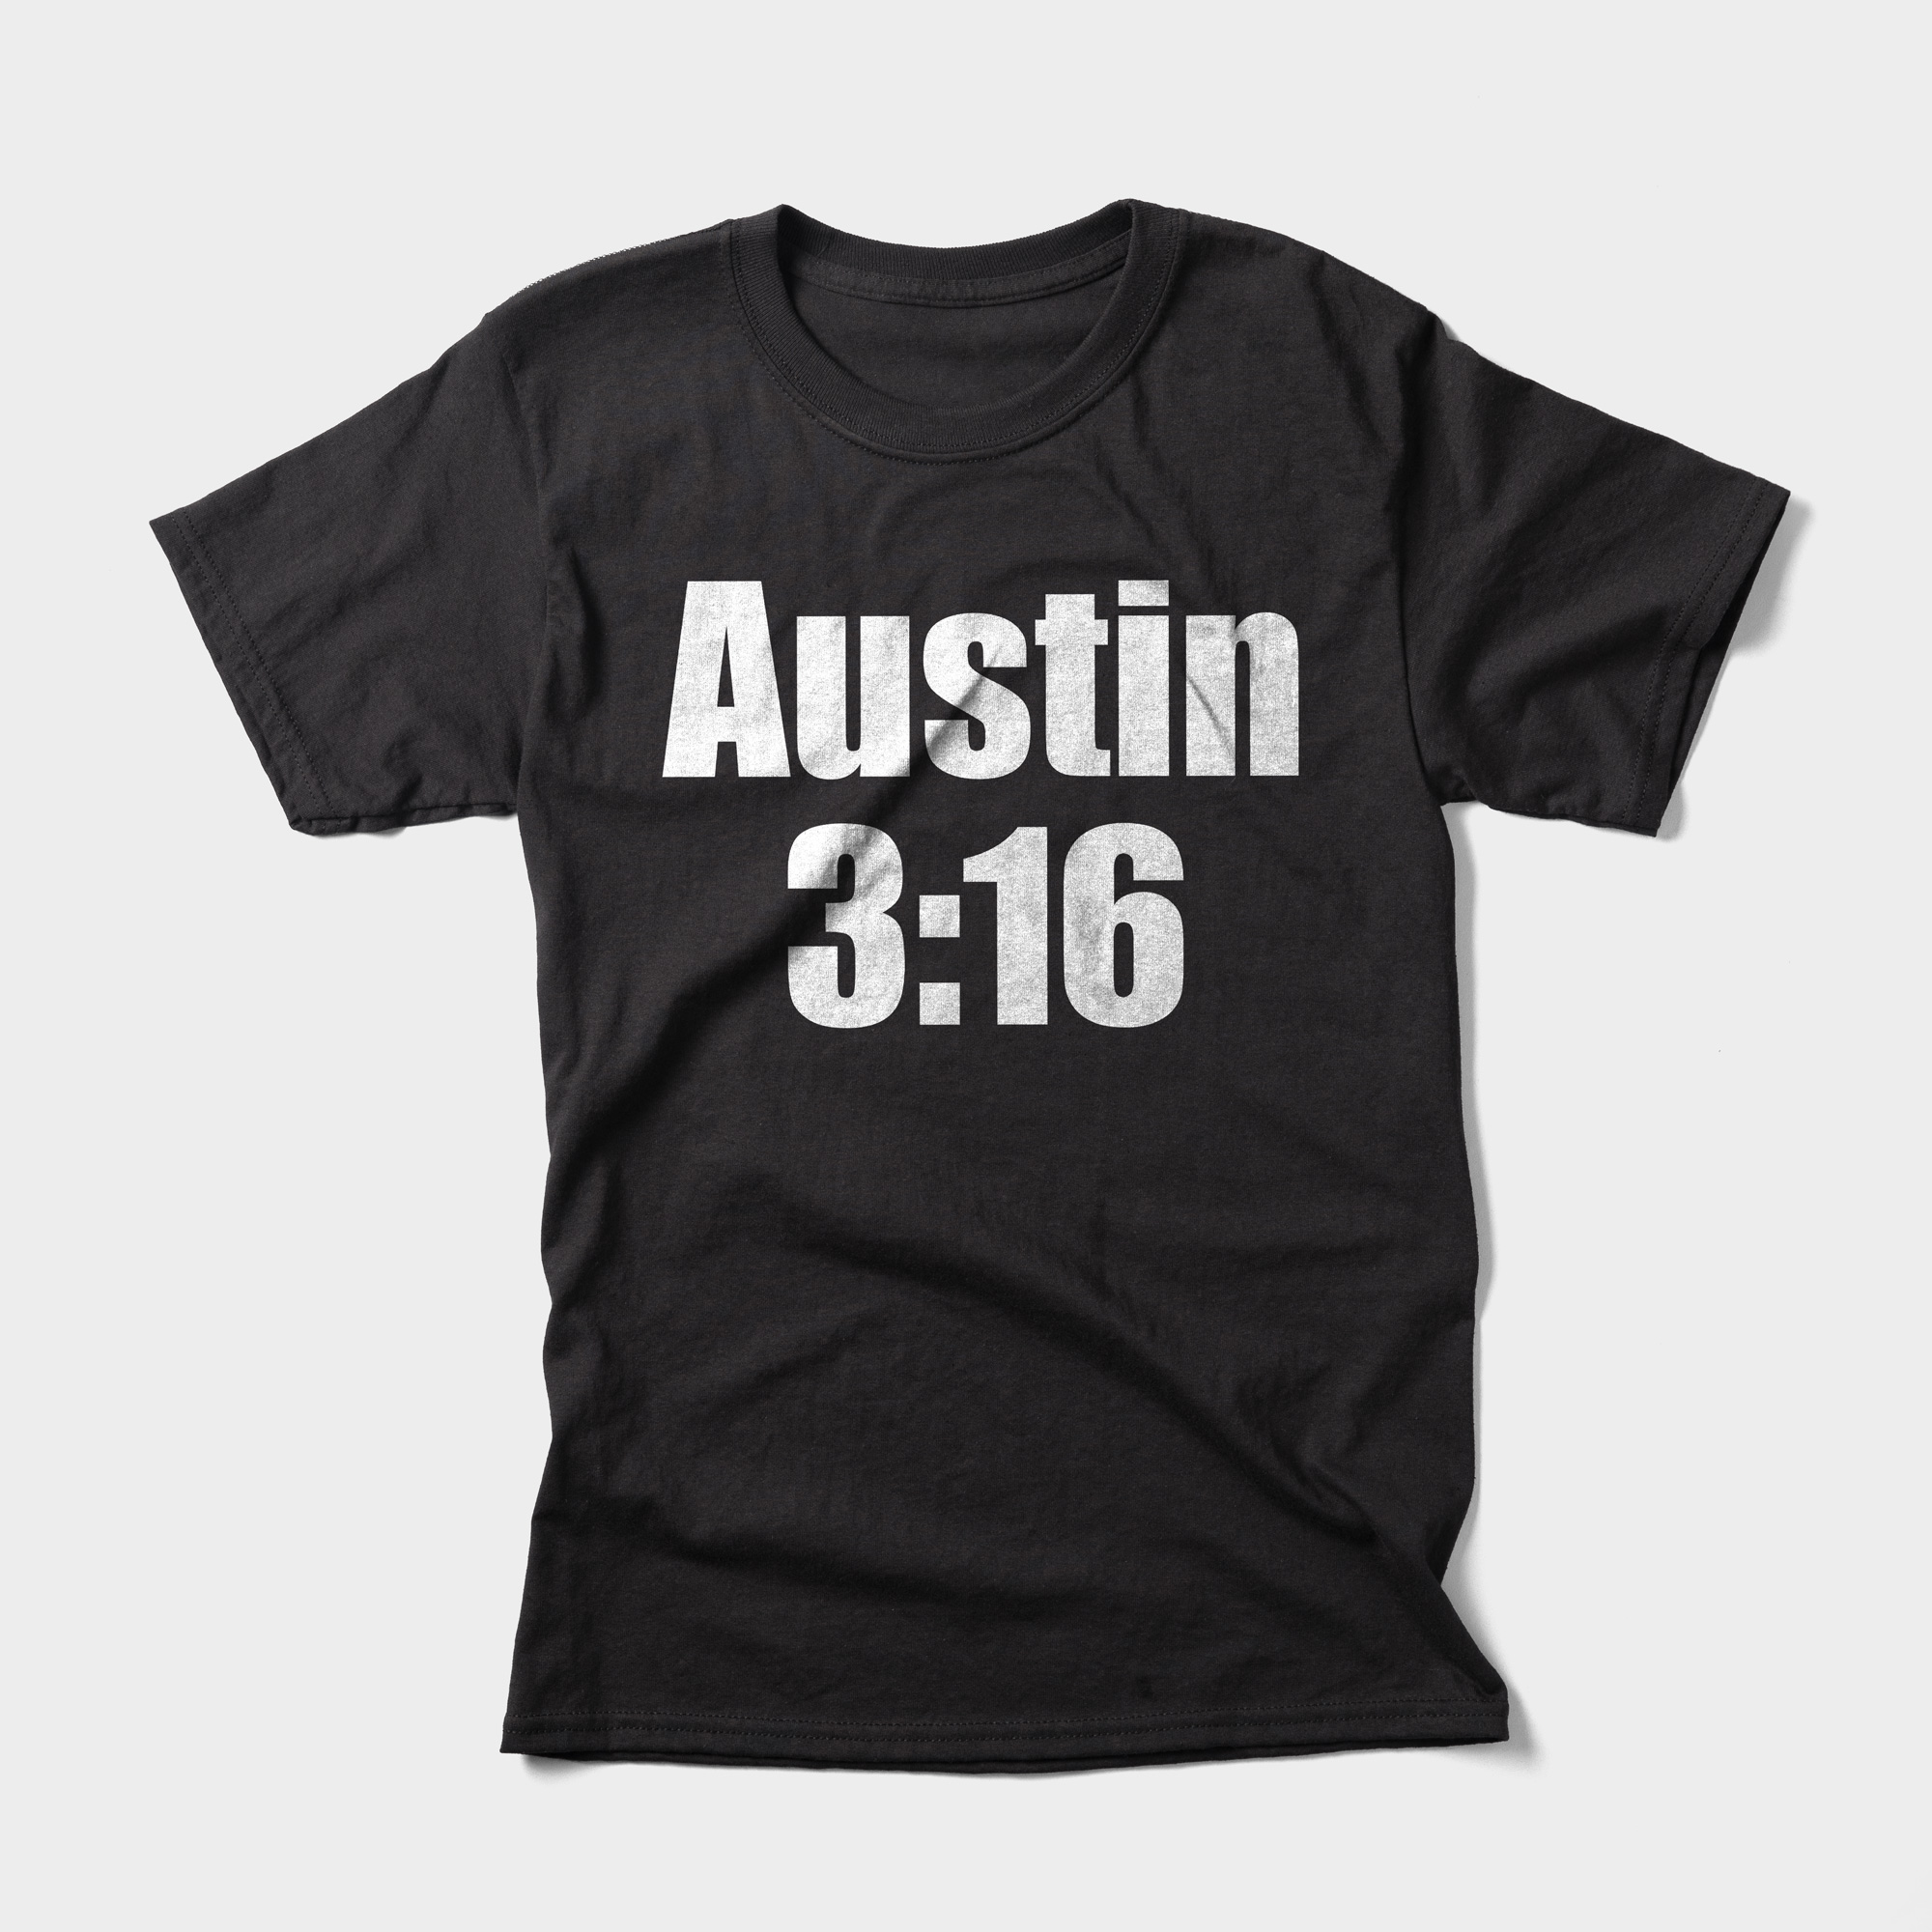 "Stone Cold" Steve Austin's Austin 3:16 catchphrase was so popular that a black t-shirt with only the phrase itself would suffice. 